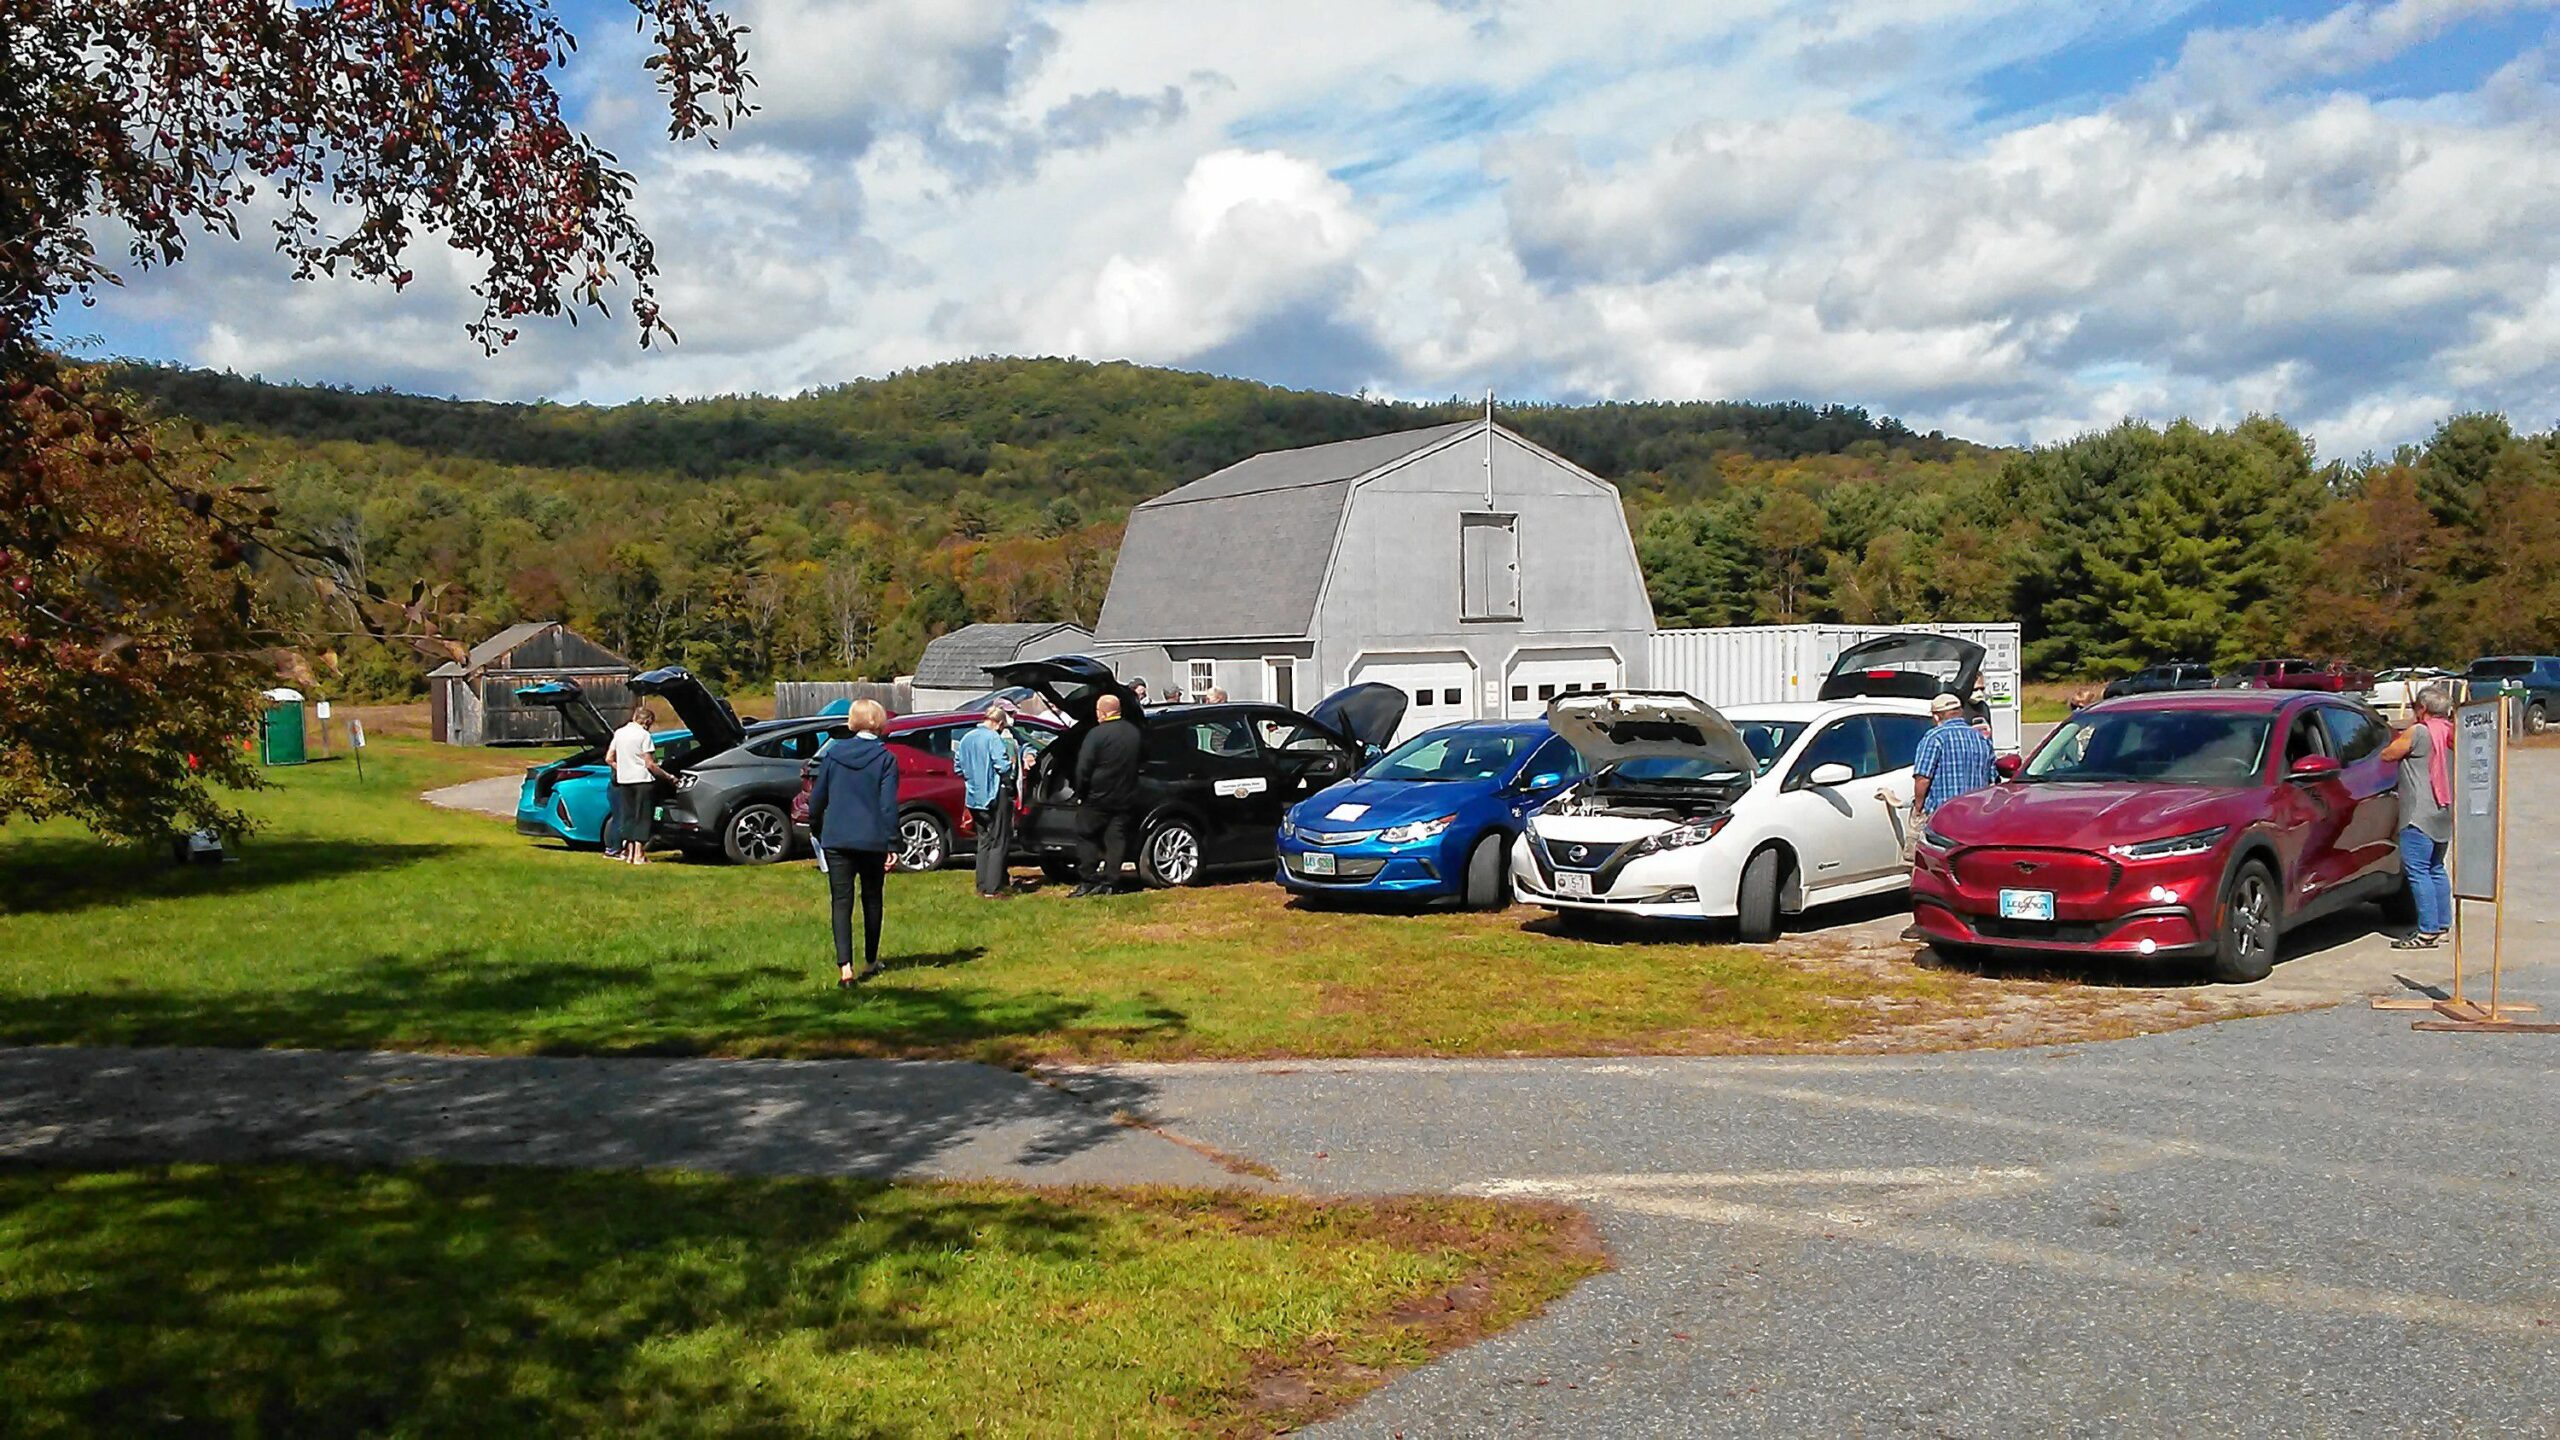 An electric vehicle showcase was part of the 2021 Cornish and Plainfield Energy Expo Sept. 11. Courtesy photo